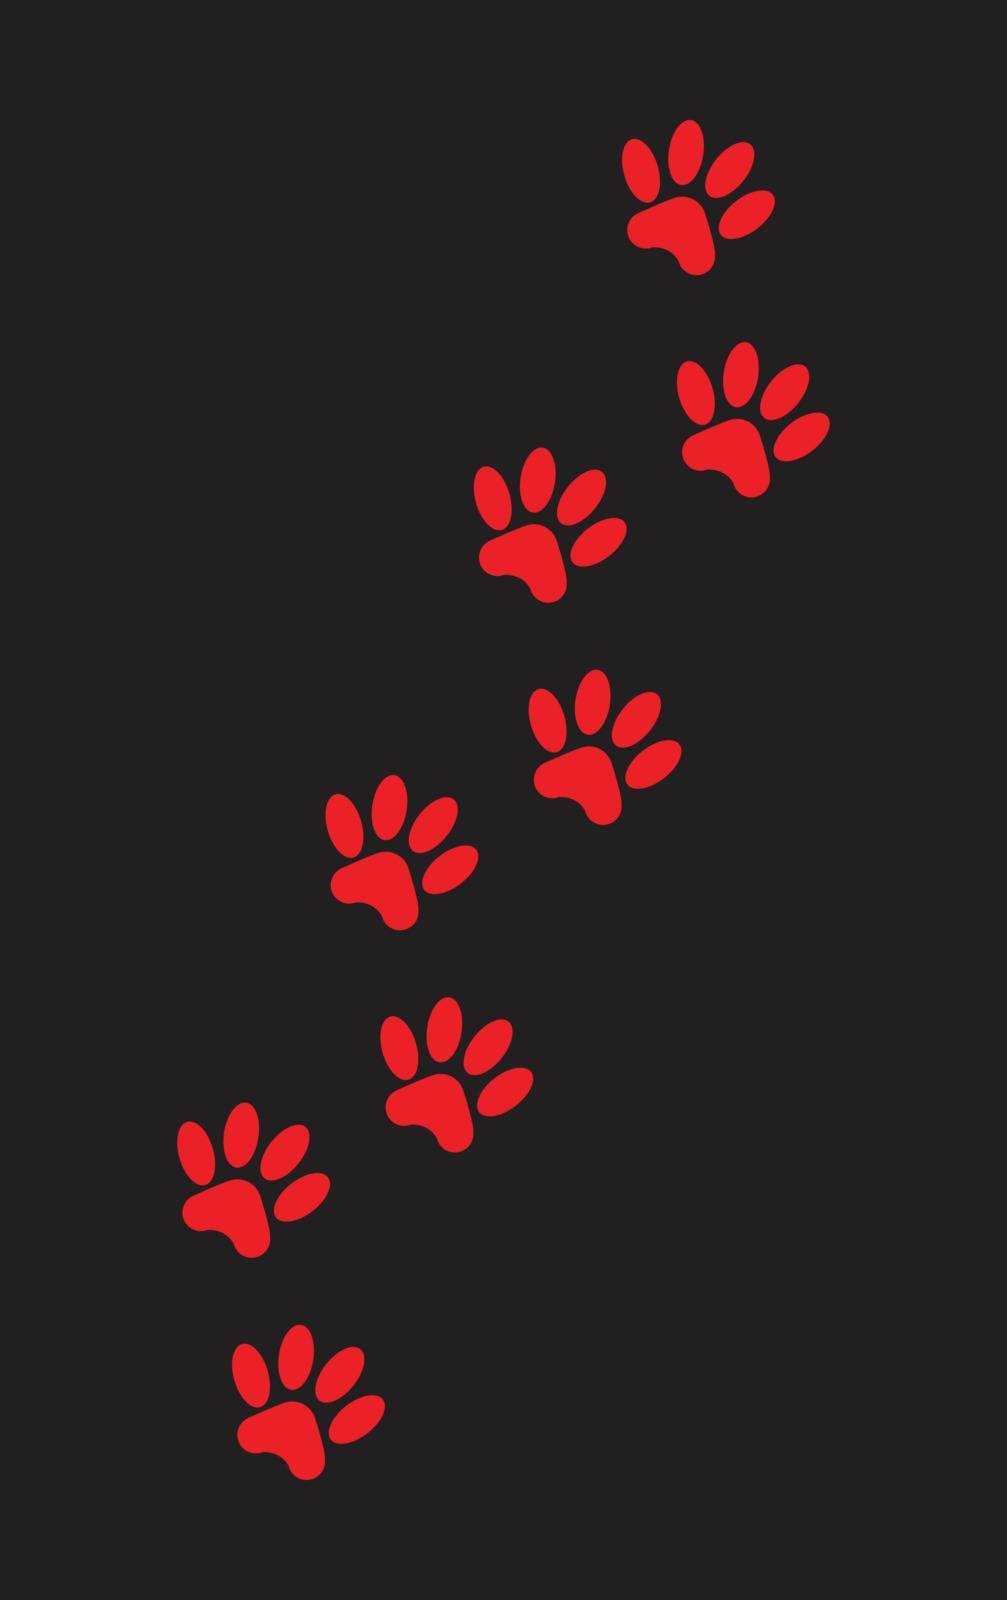 A set of canine paw prints in red on black